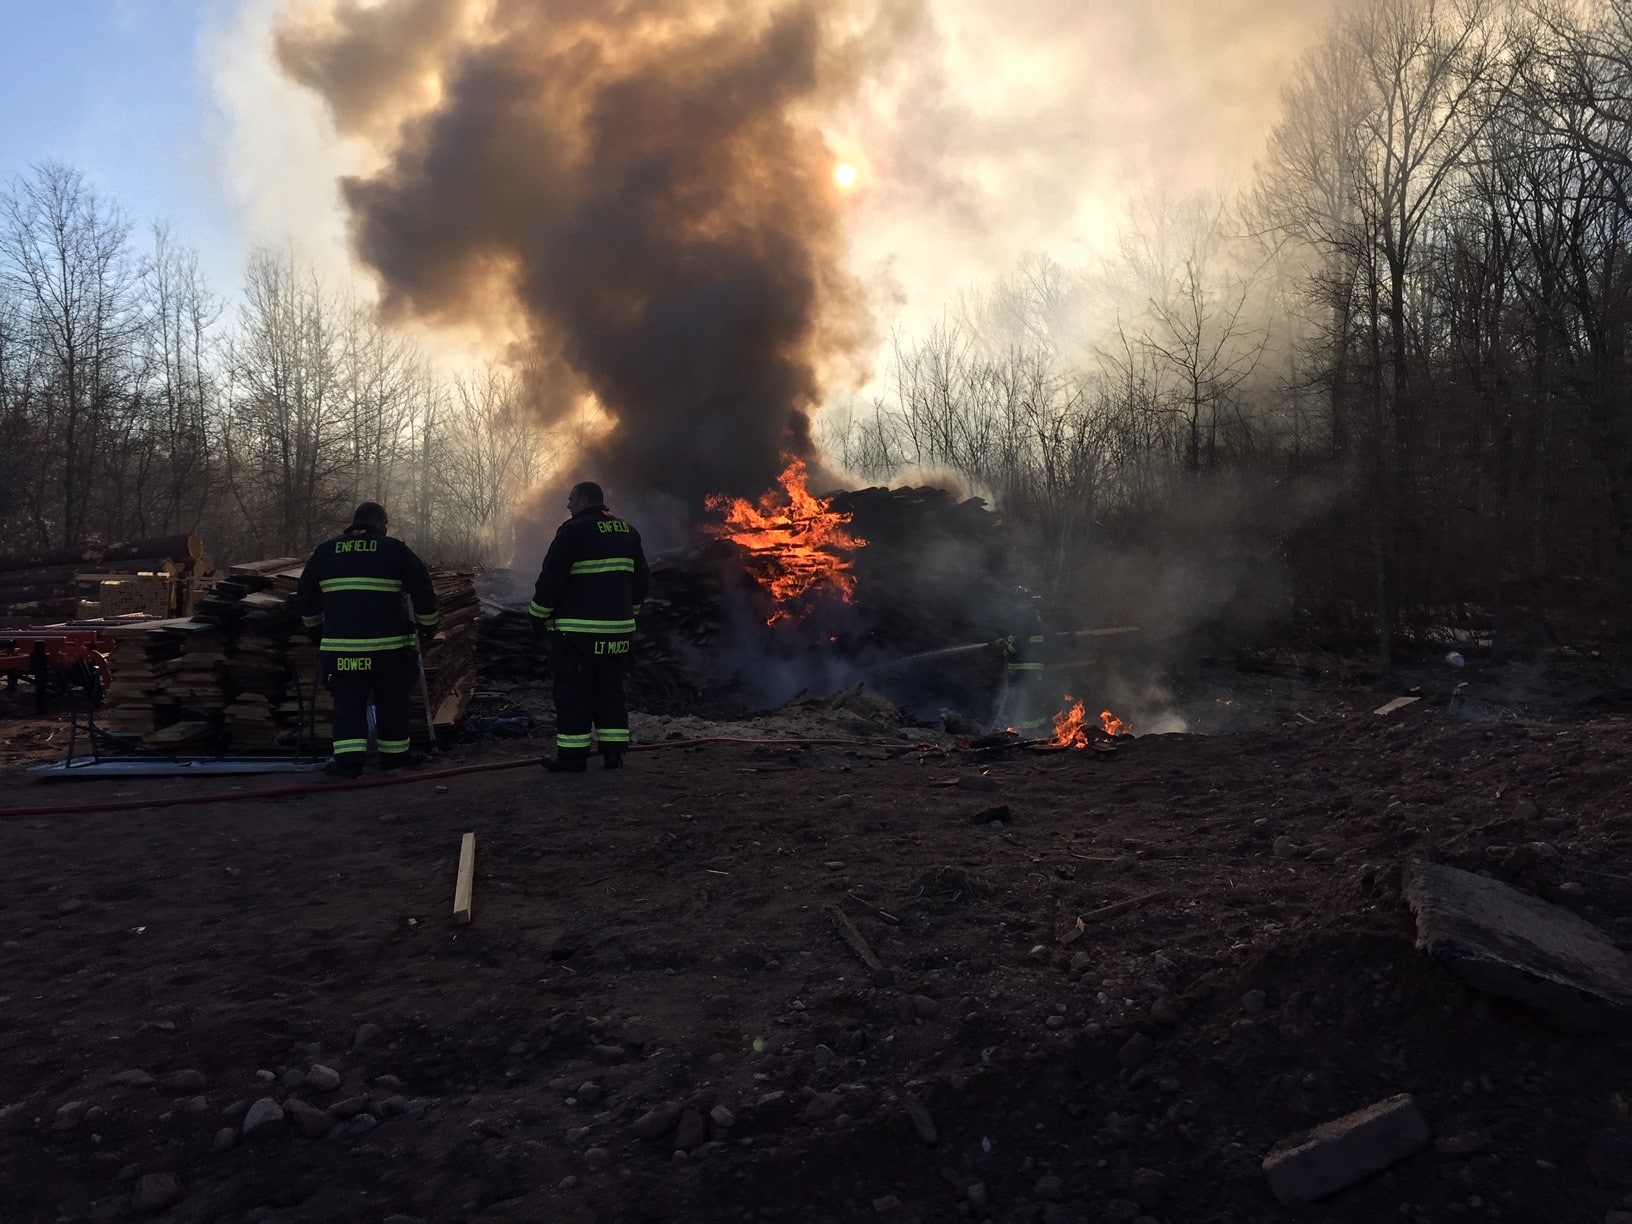 Chief Edward N. Richards reports that Enfield Fire District No. 1 responded to a large lumber fire this morning at 60 Weymouth Road. (Photo courtesy Enfield Fire District No. 1)